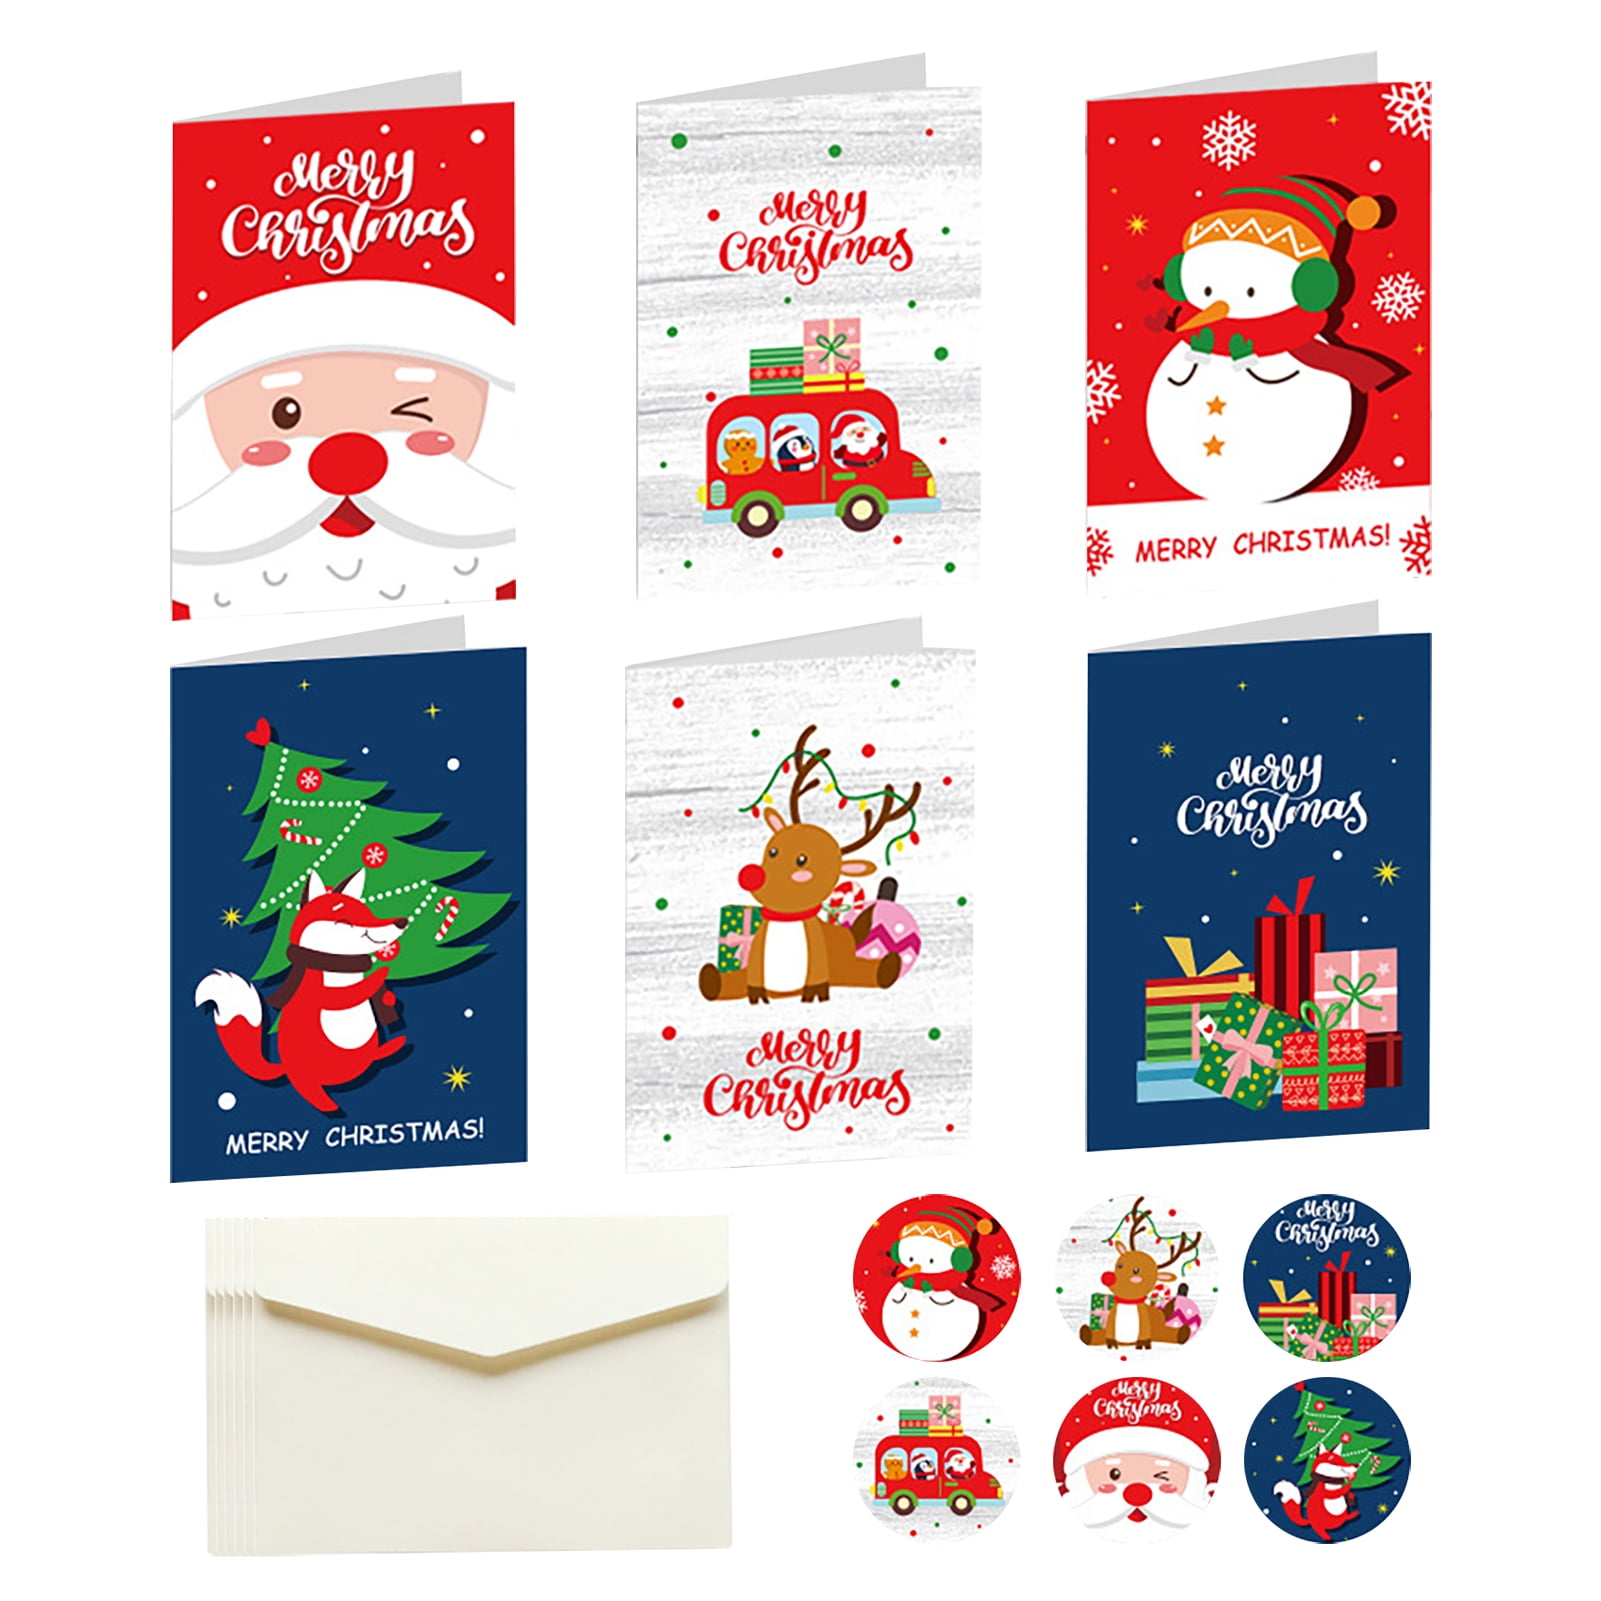 QIAONIUNIU Card Making Kits DIY Handmade Greeting Card Kits for Kids,  Christmas Card Folded Cards and Matching Envelopes Thank You Card Art  Crafts Crafty Set Gifts for Girls Boys 3